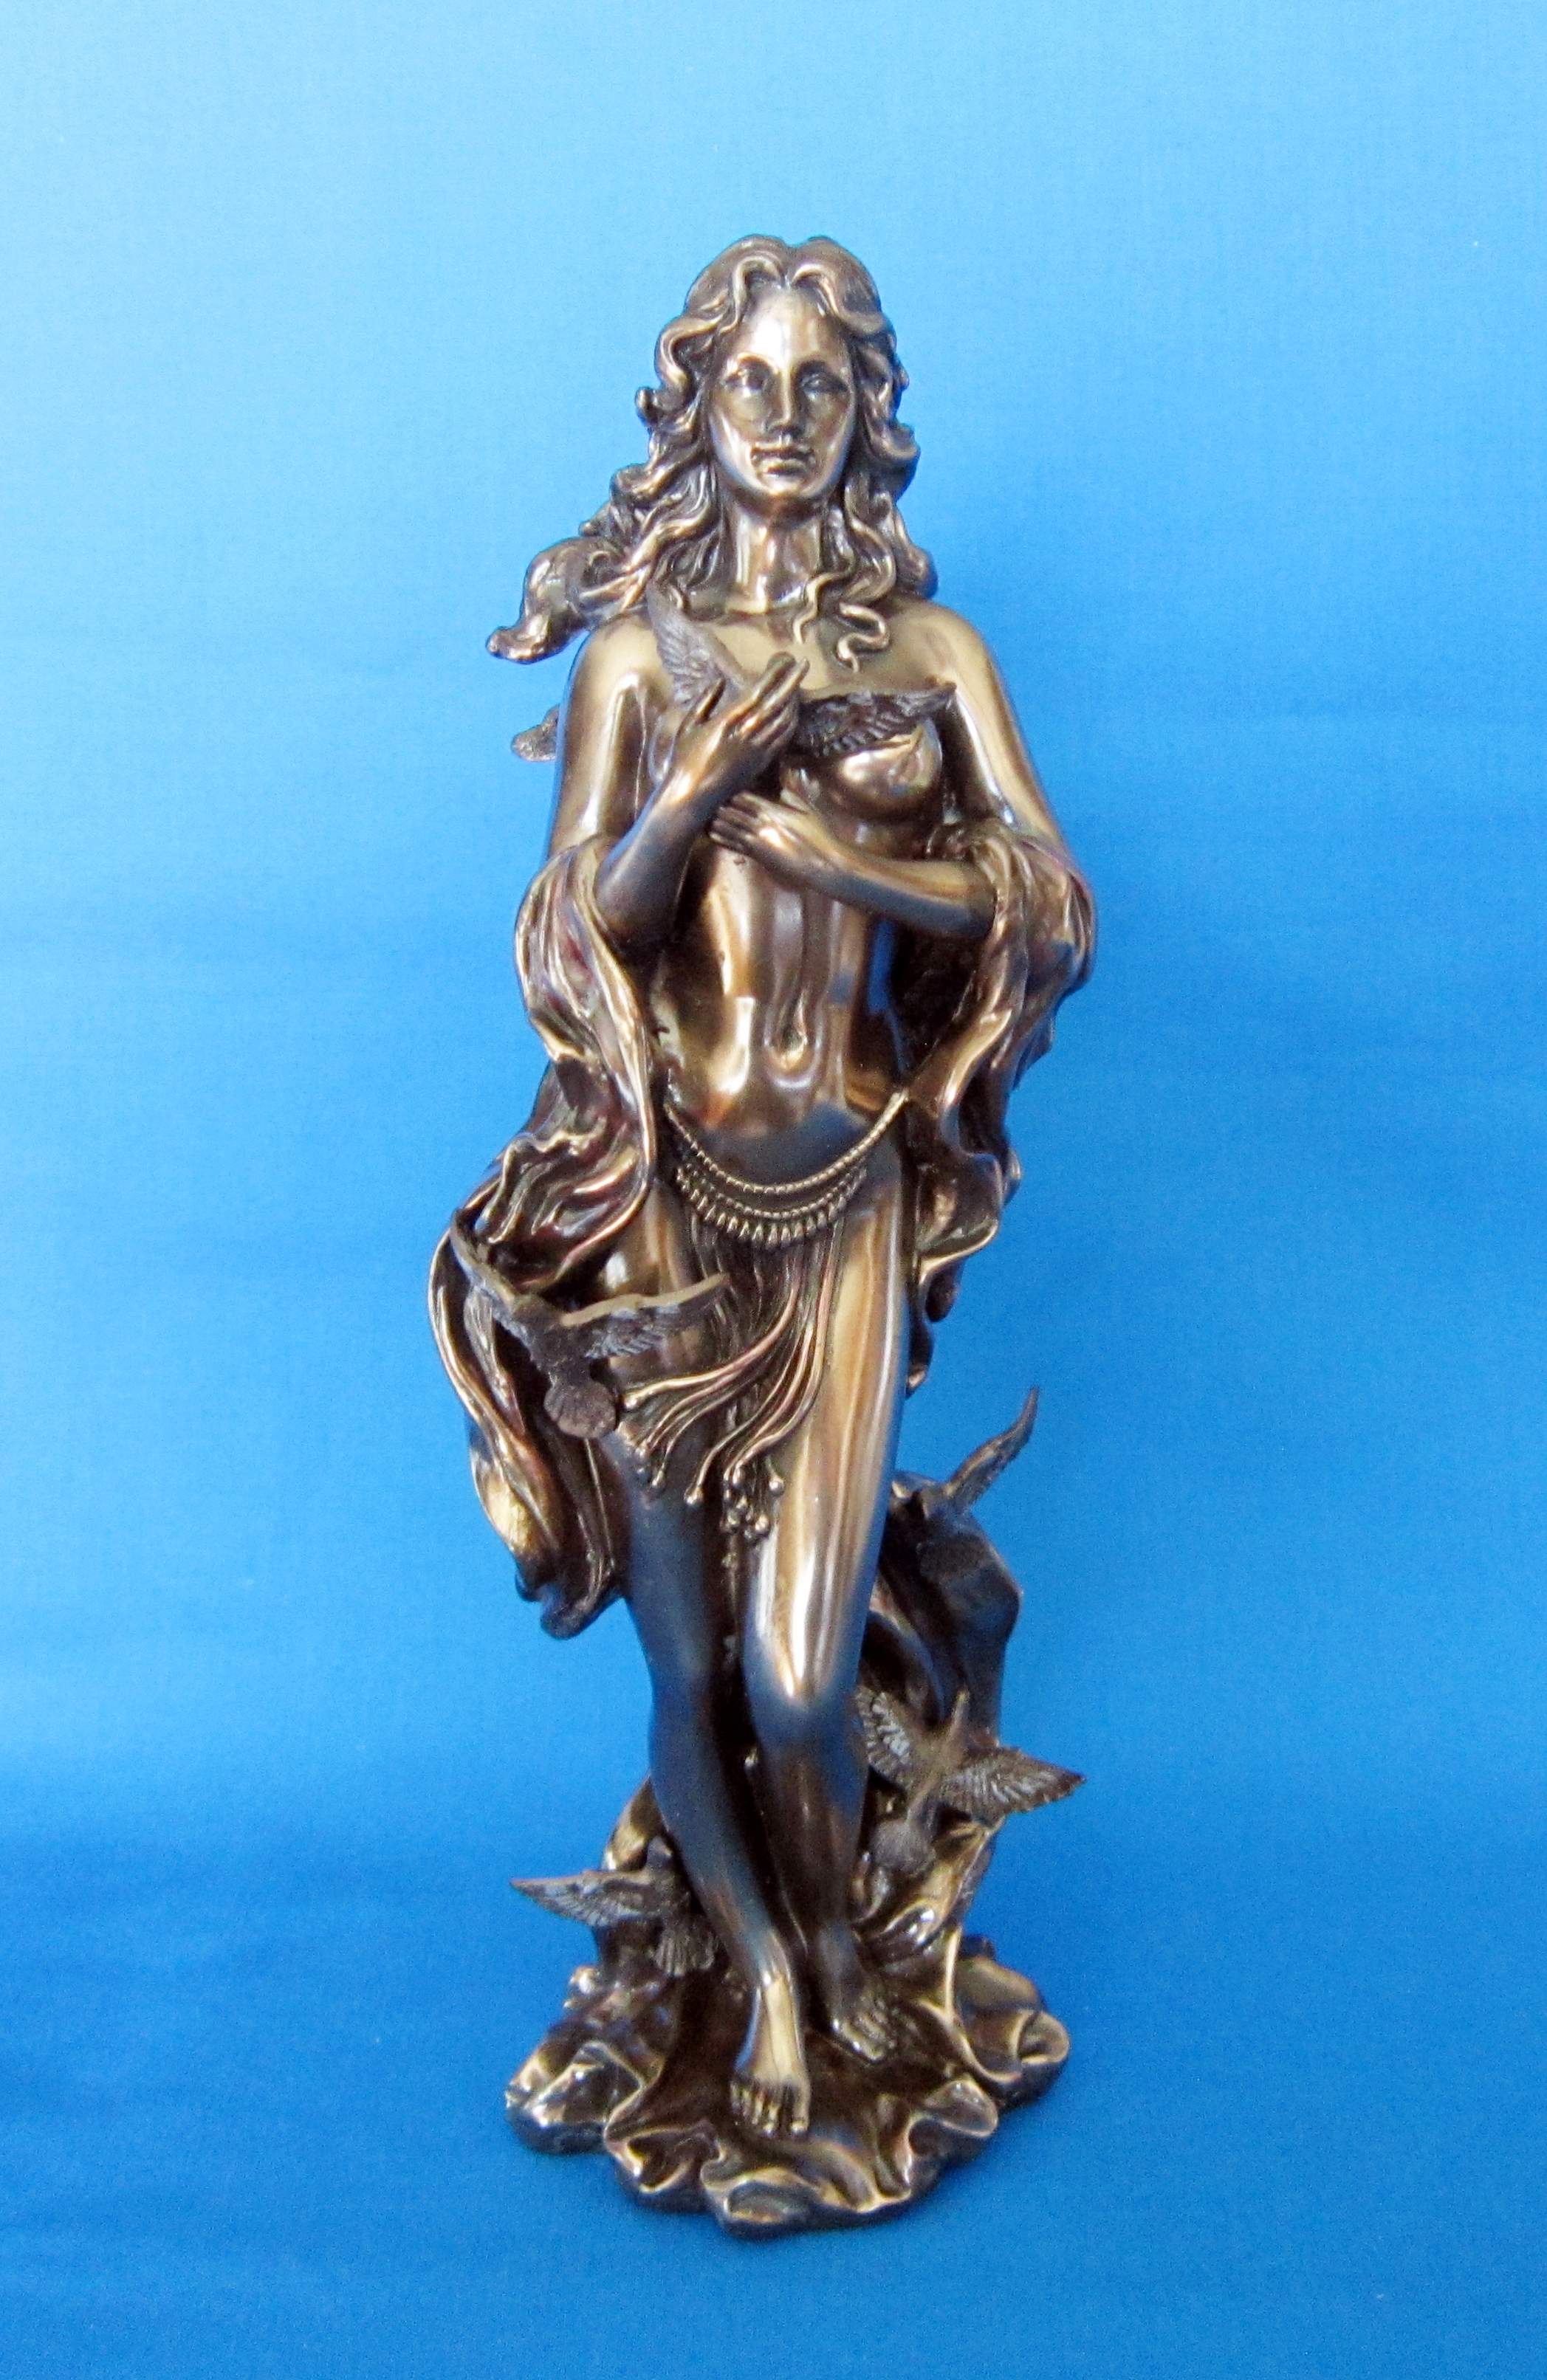 Goddess Of Love Oshun Beauty And Marriage Statue Sculpture Figure